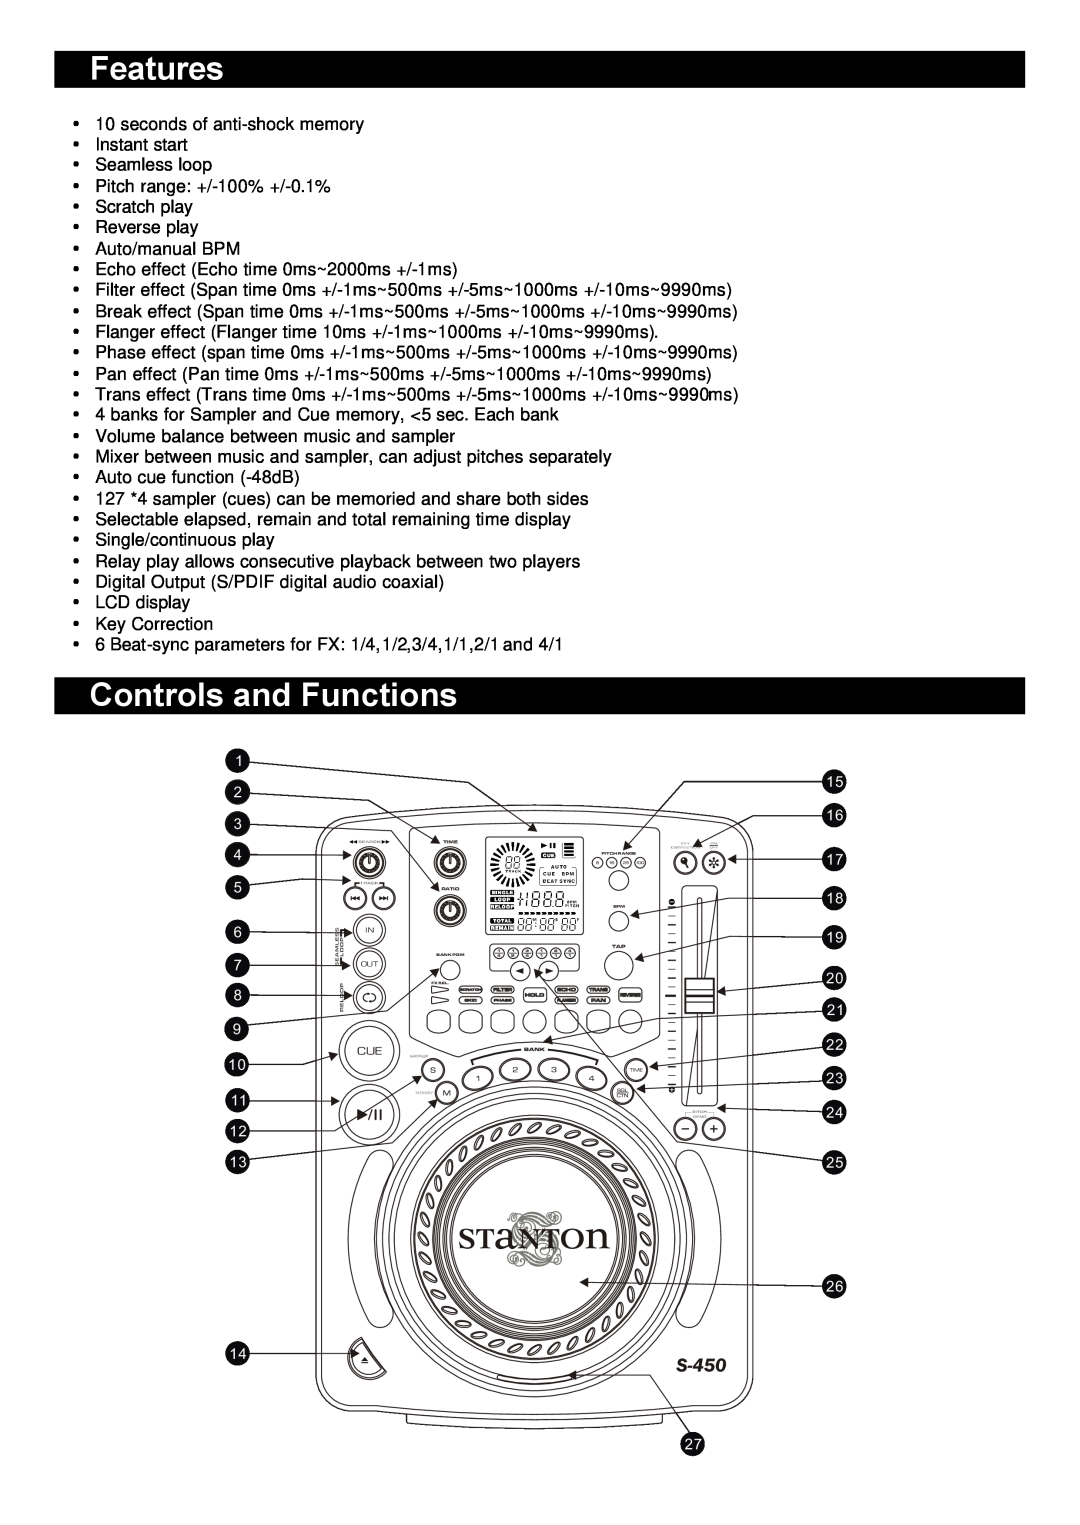 Stanton S-450 user manual Features, Controls and Functions 